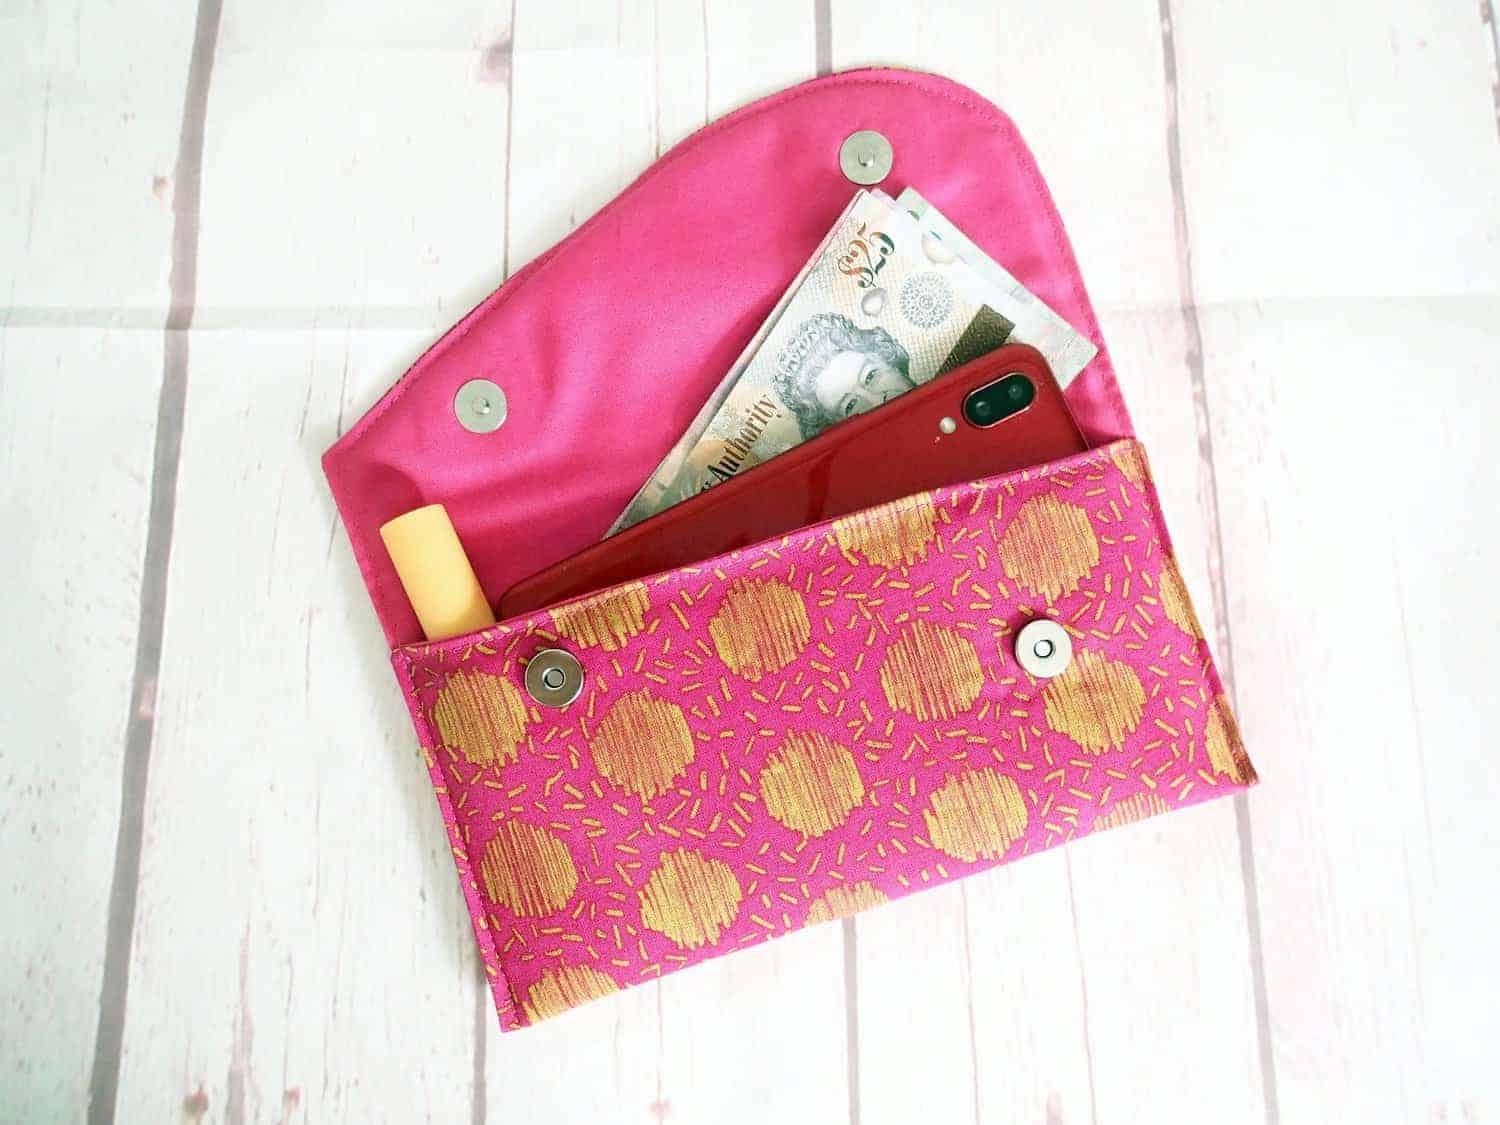 Radley Clutch bag sewing pattern in two sizes. Easy to sew beginner clutch bag pattern. Just one printable pattern piece, no zippers, minimal materials. These diy clutch bag patterns are perfect for the sewing beginner. Can be sewn quilted, instructions included for quilted and not quilted. SewSimpleBags